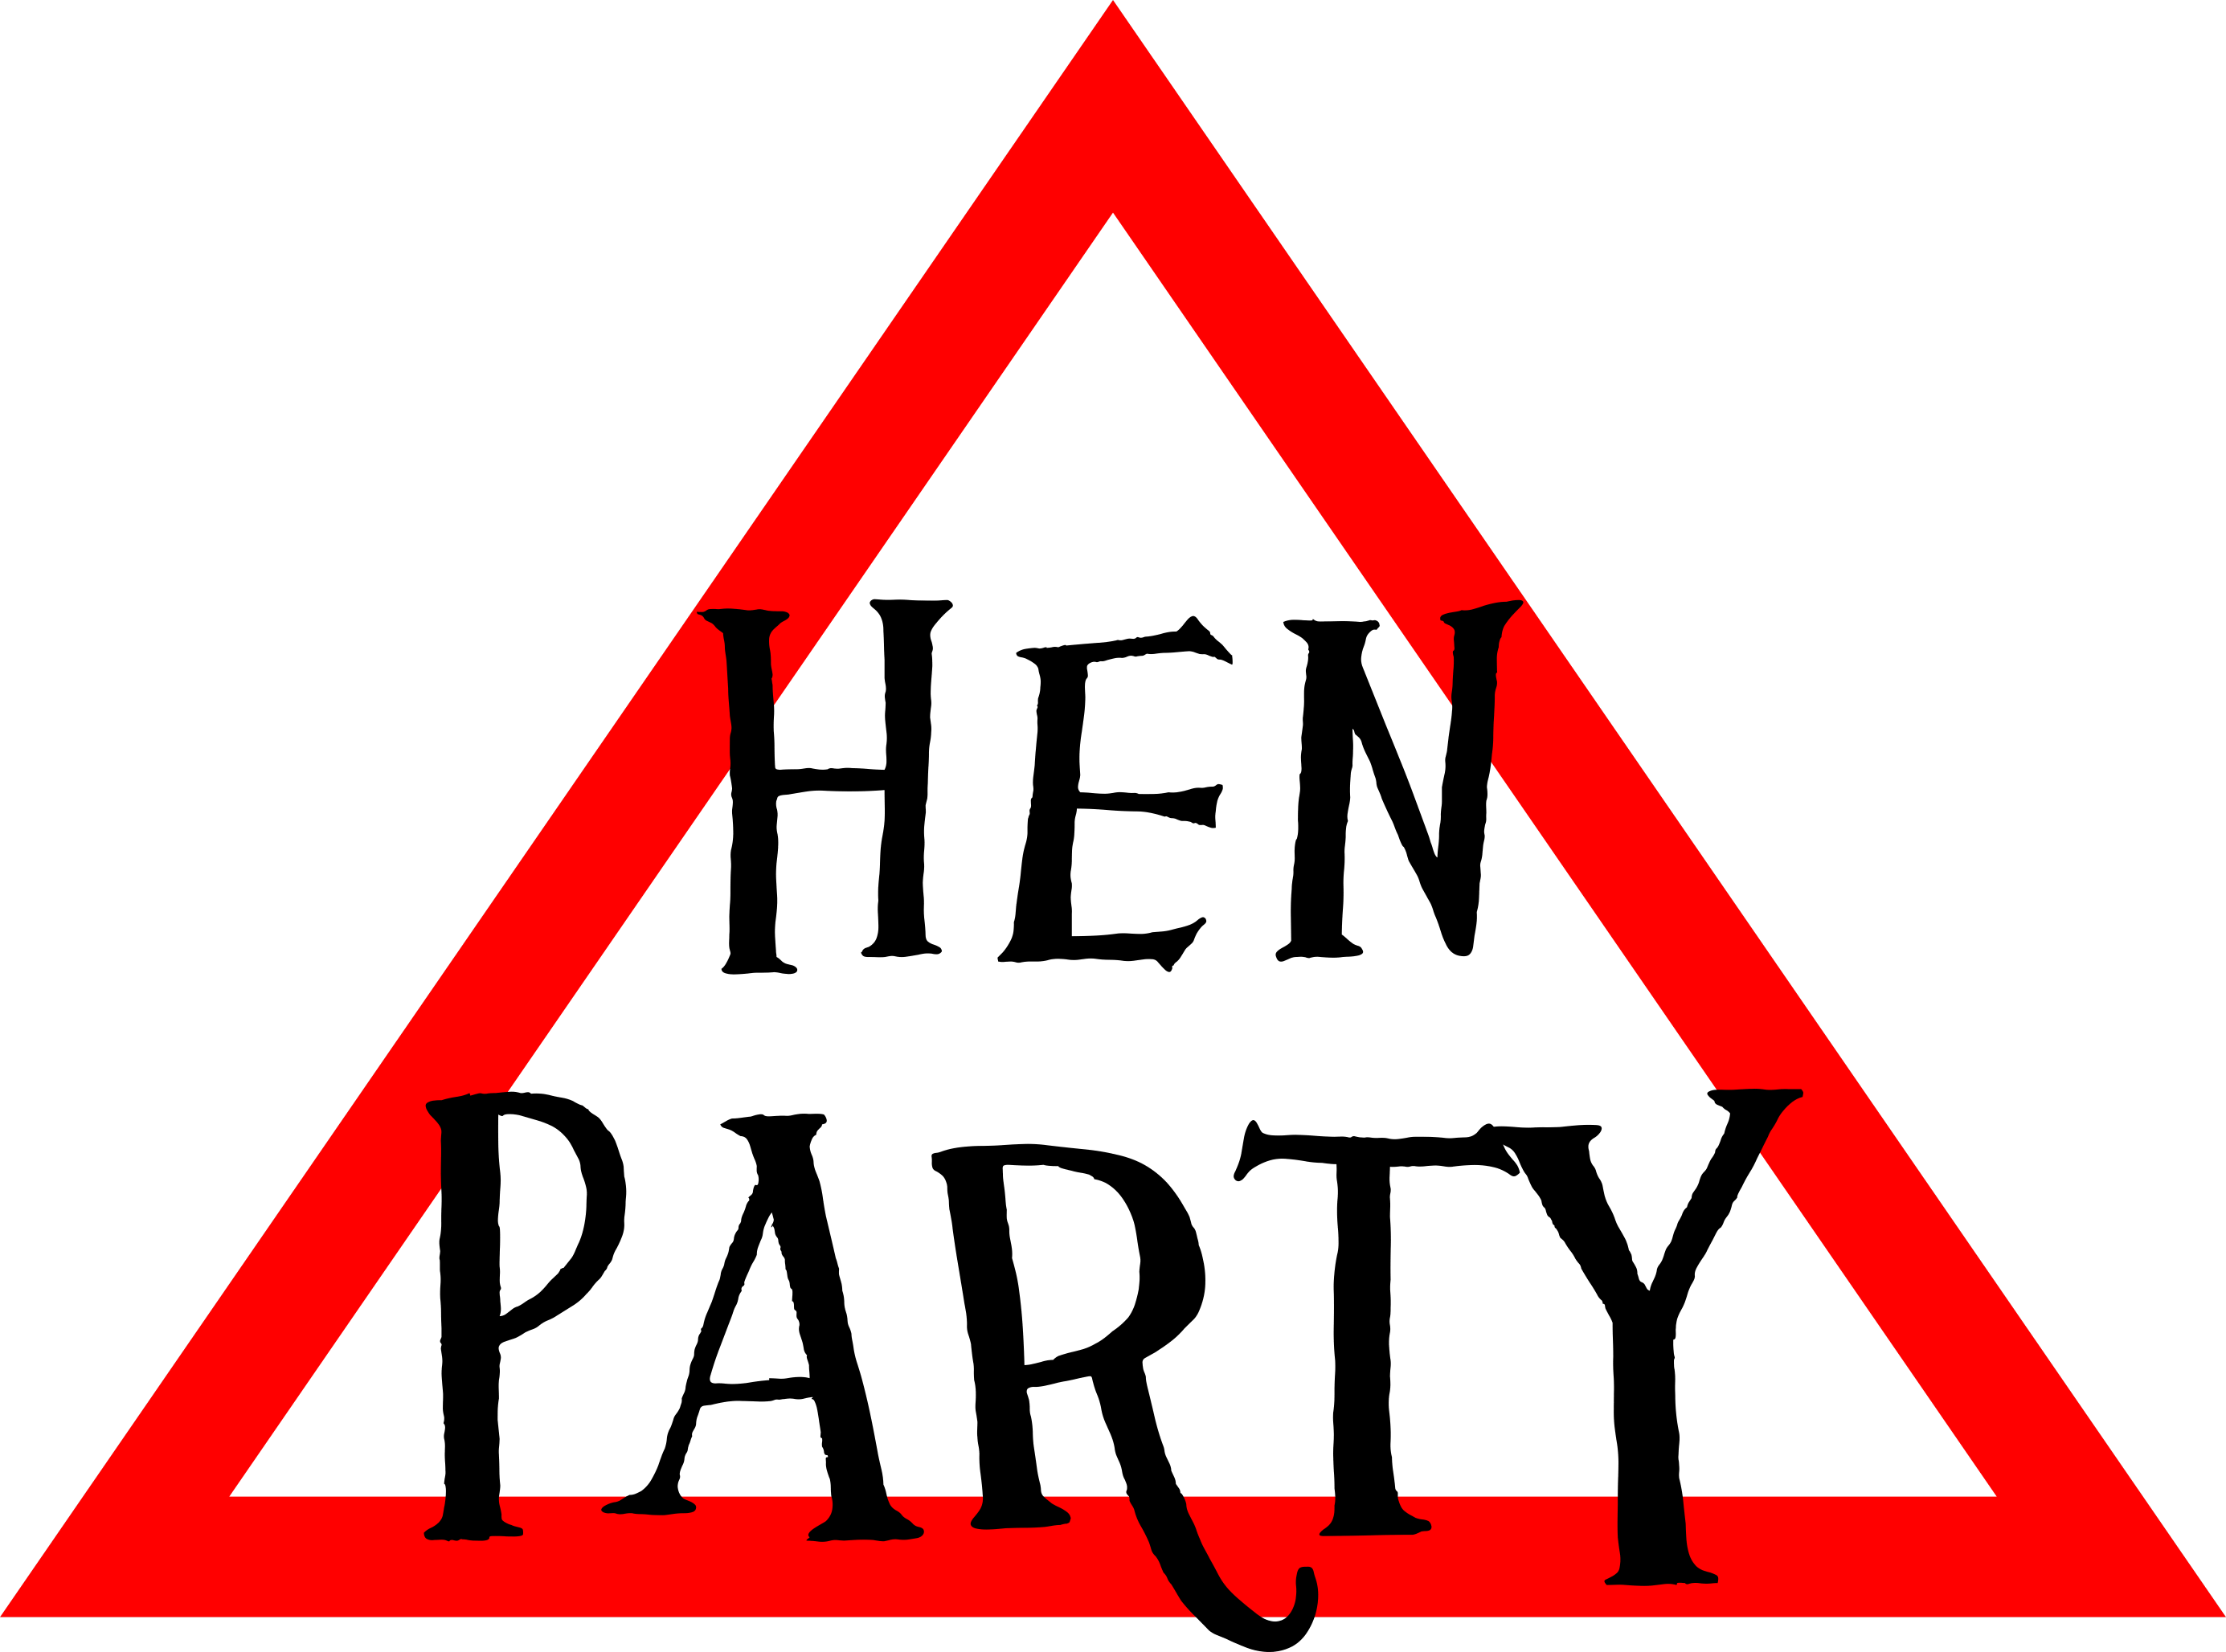 Hen party. Night clipart transparent